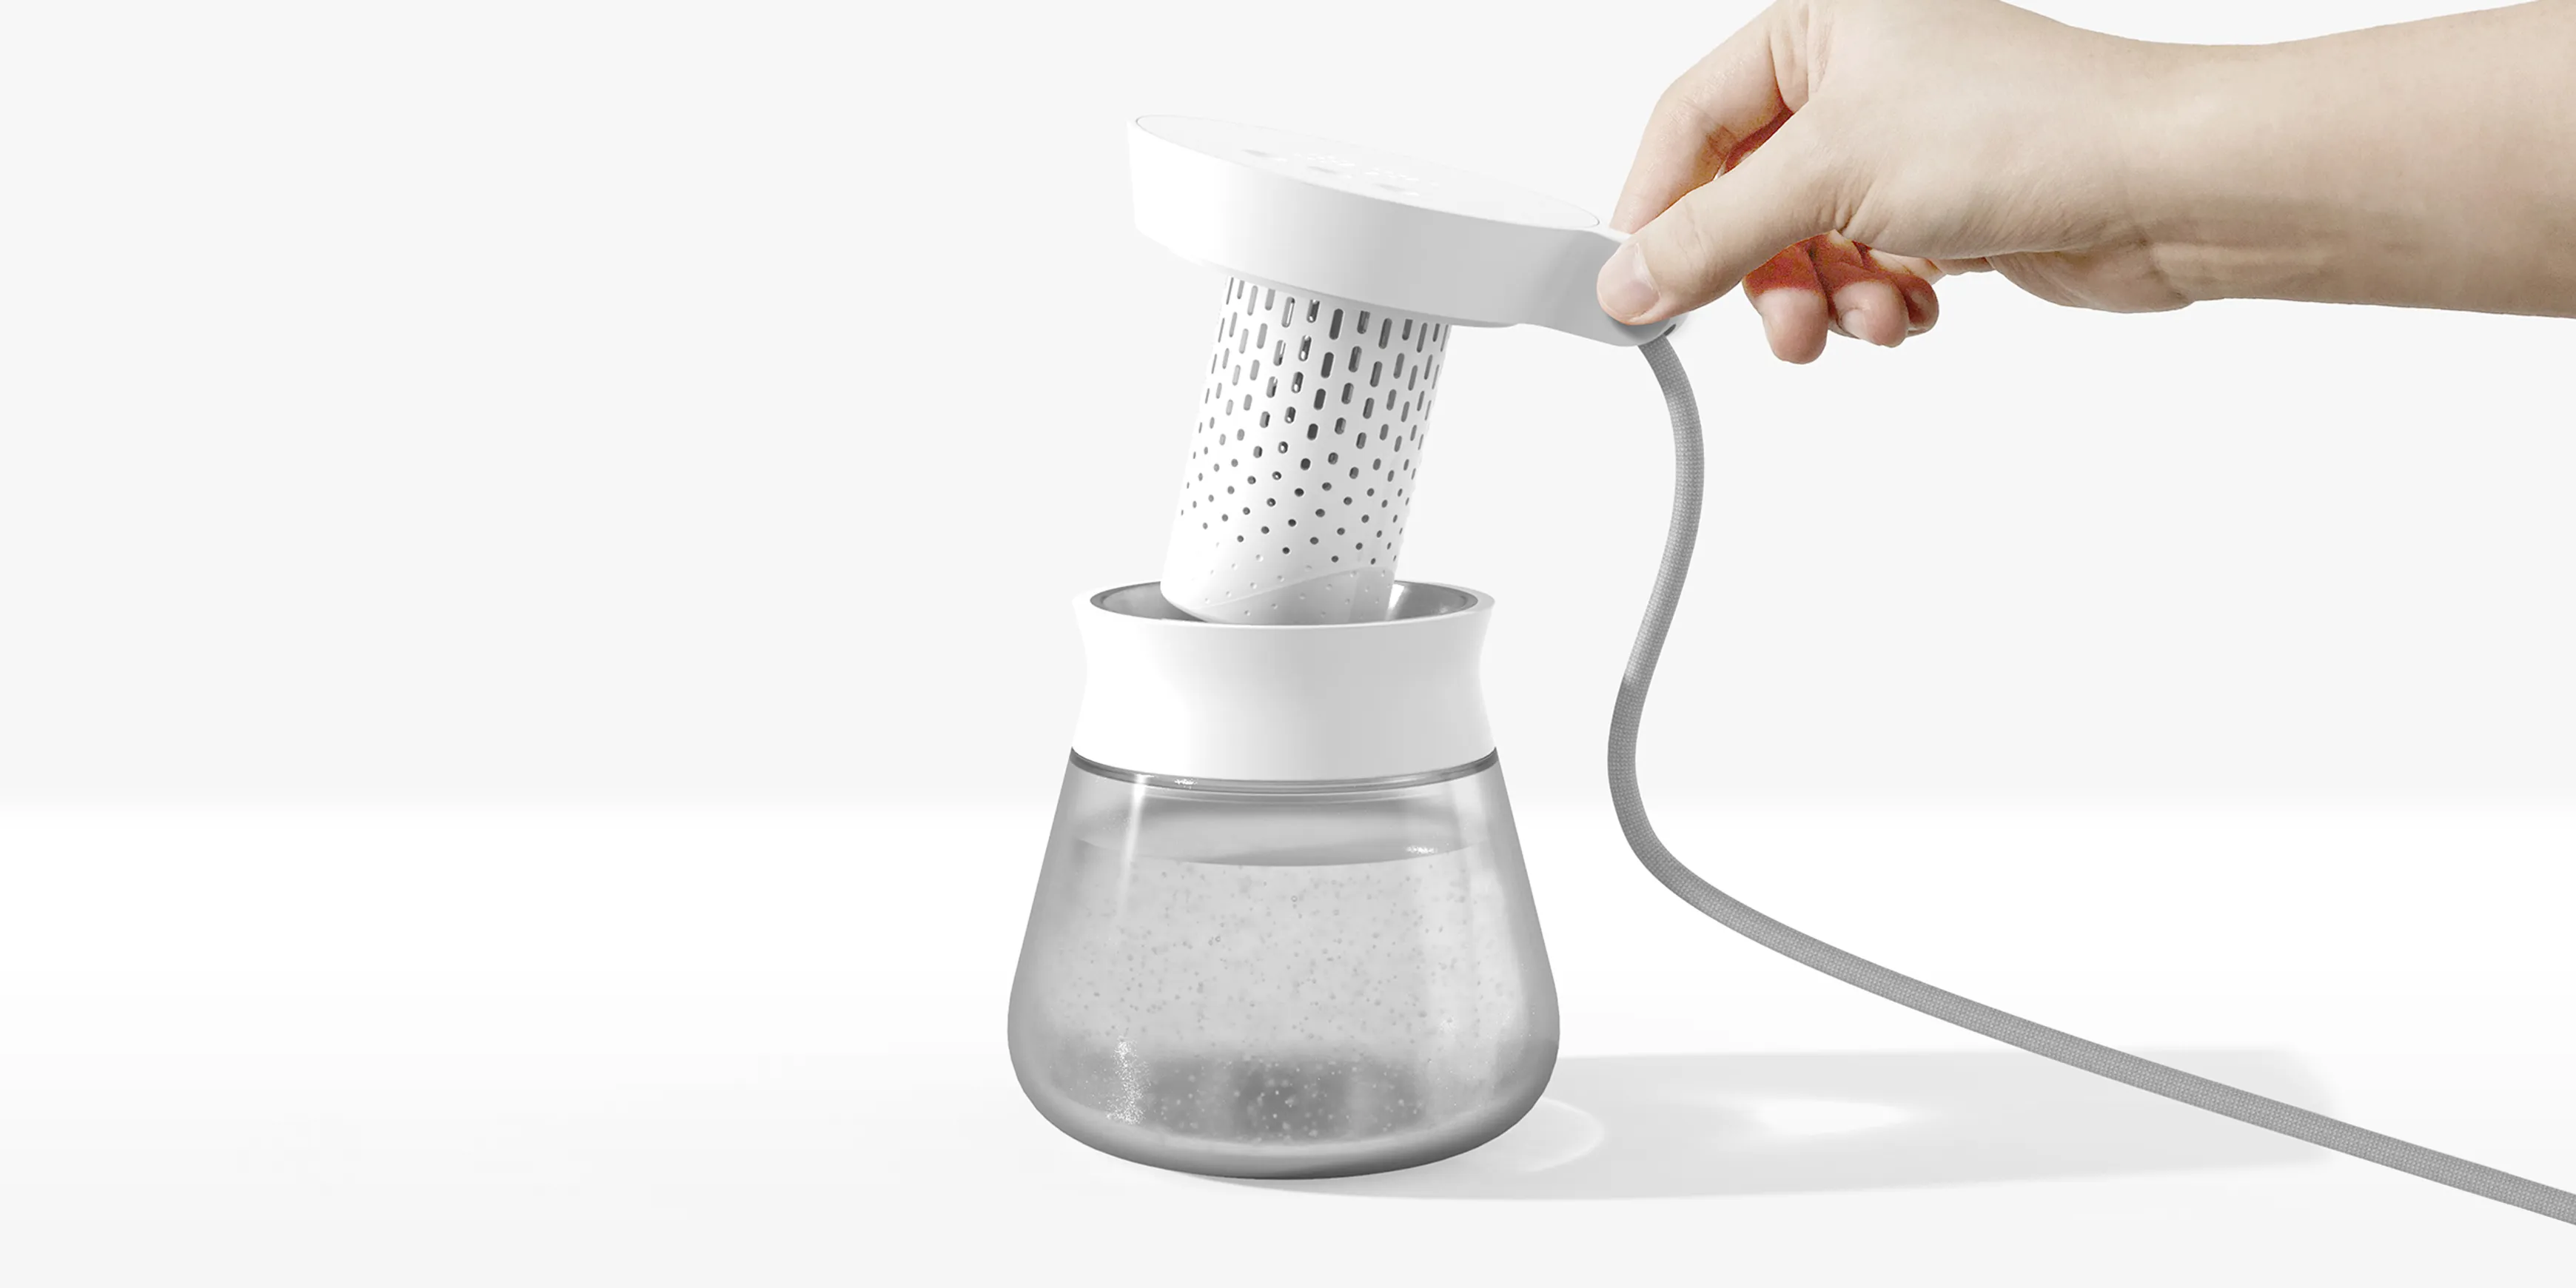 A hand reaching in to take of the heating element of the Intoku smart water kettle